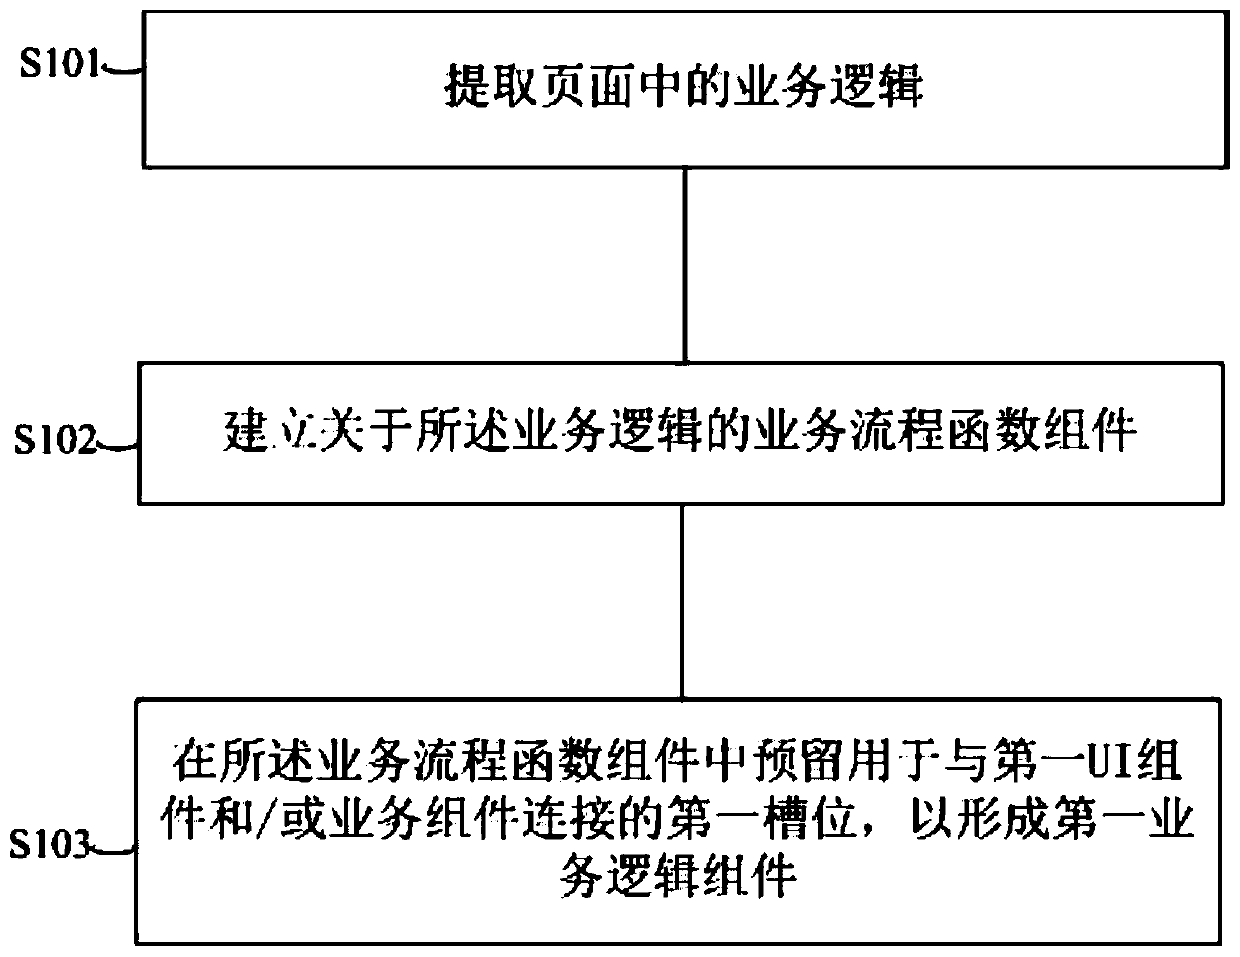 Method and system for establishing service logic component and service component and generating page